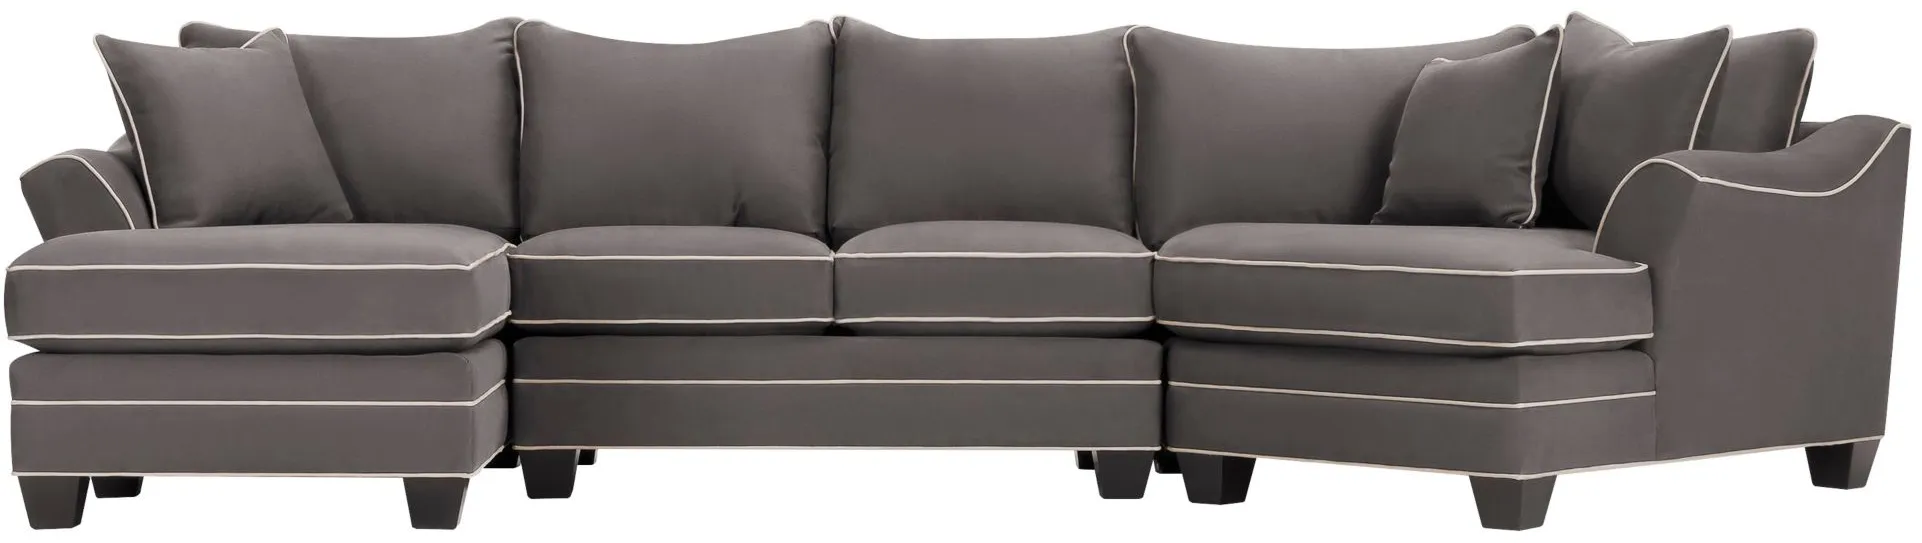 Foresthill 3-pc. Left Hand Facing Sectional Sofa in Suede So Soft Slate by H.M. Richards